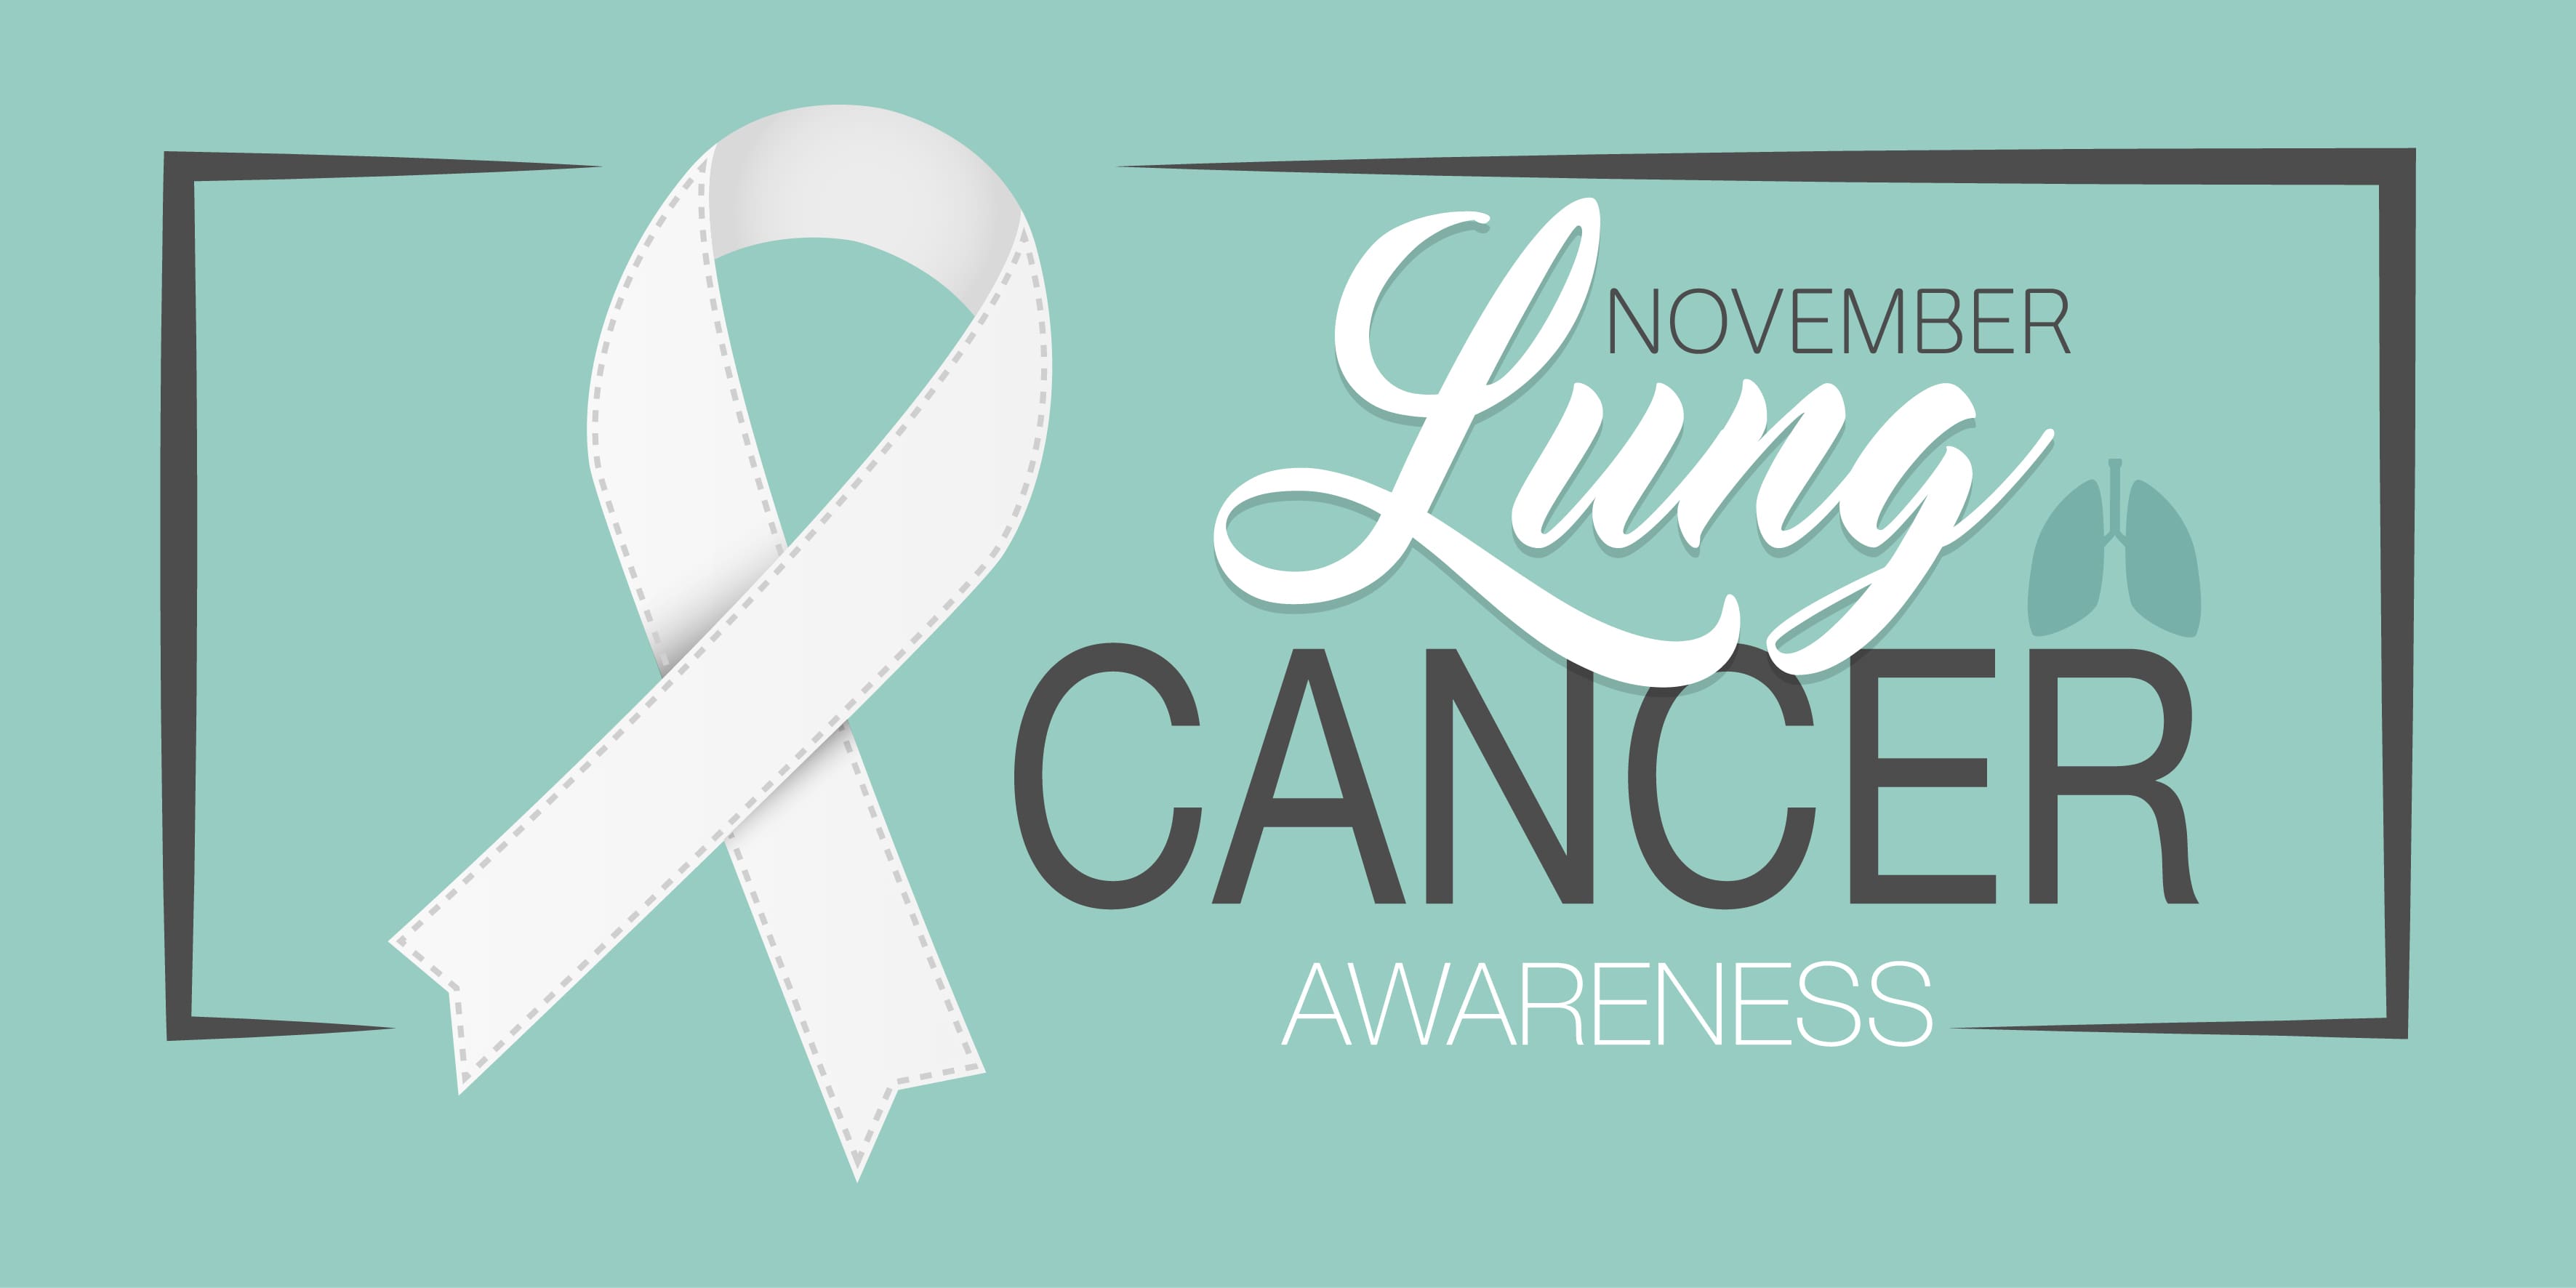 This month is Lung Cancer Awareness Month!